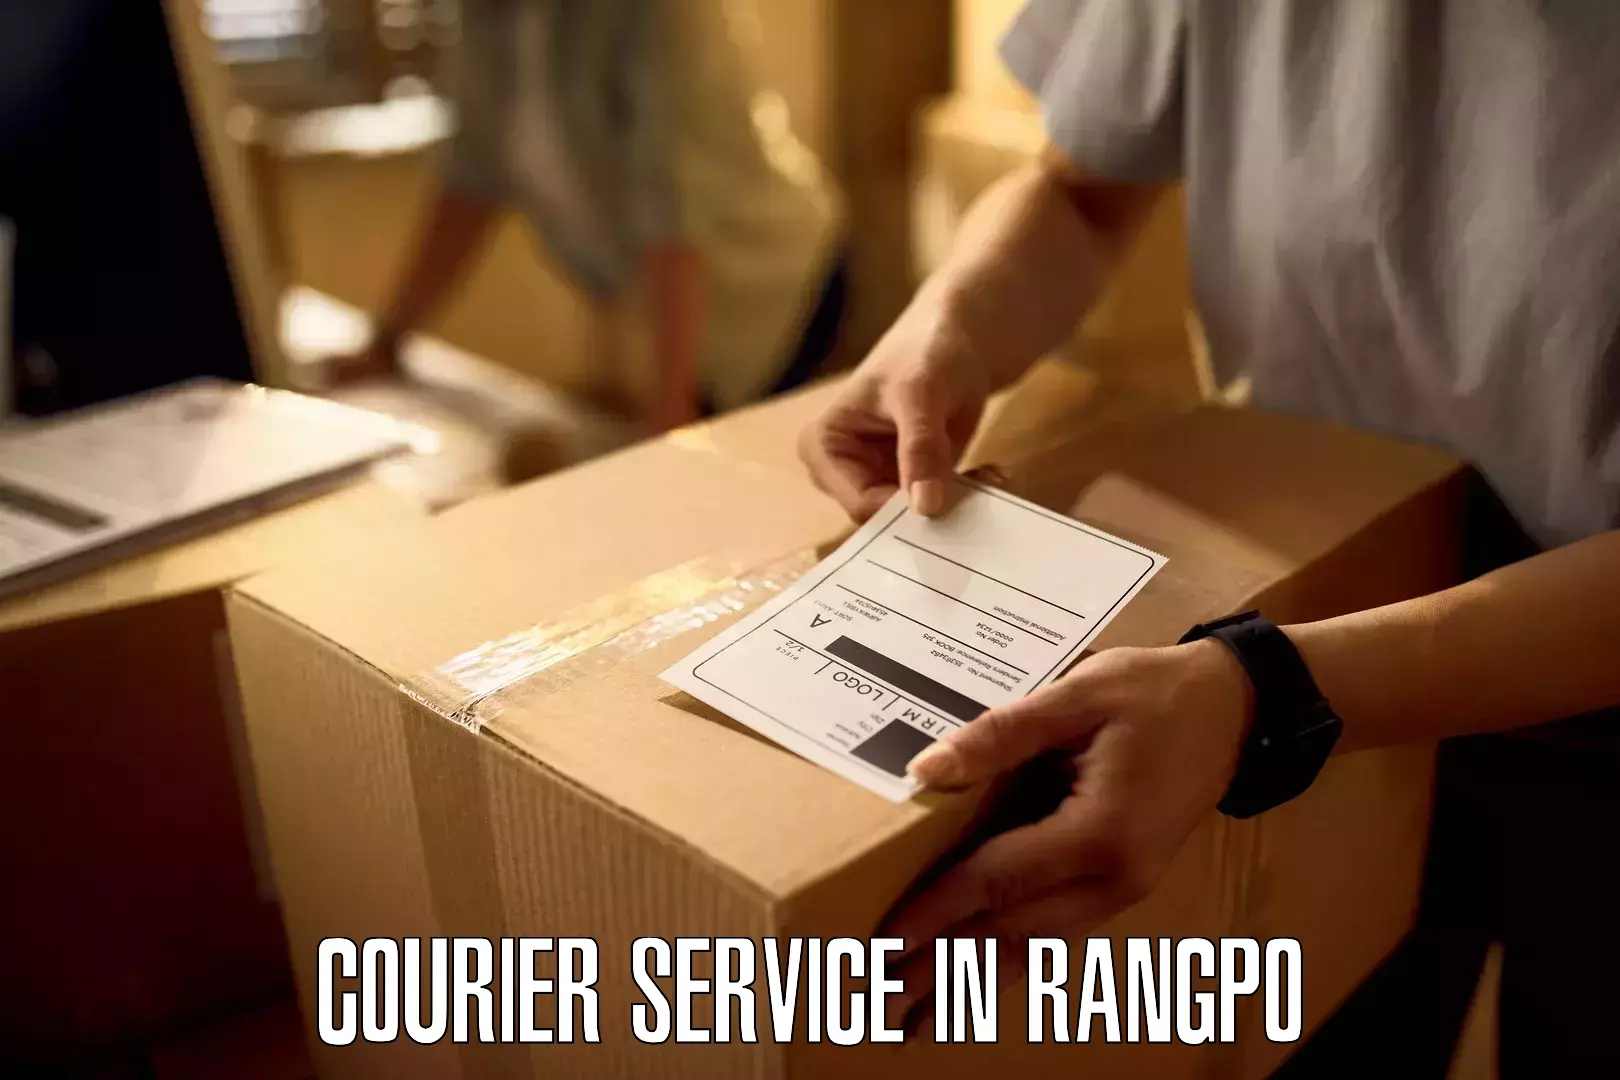 Speedy delivery service in Rangpo